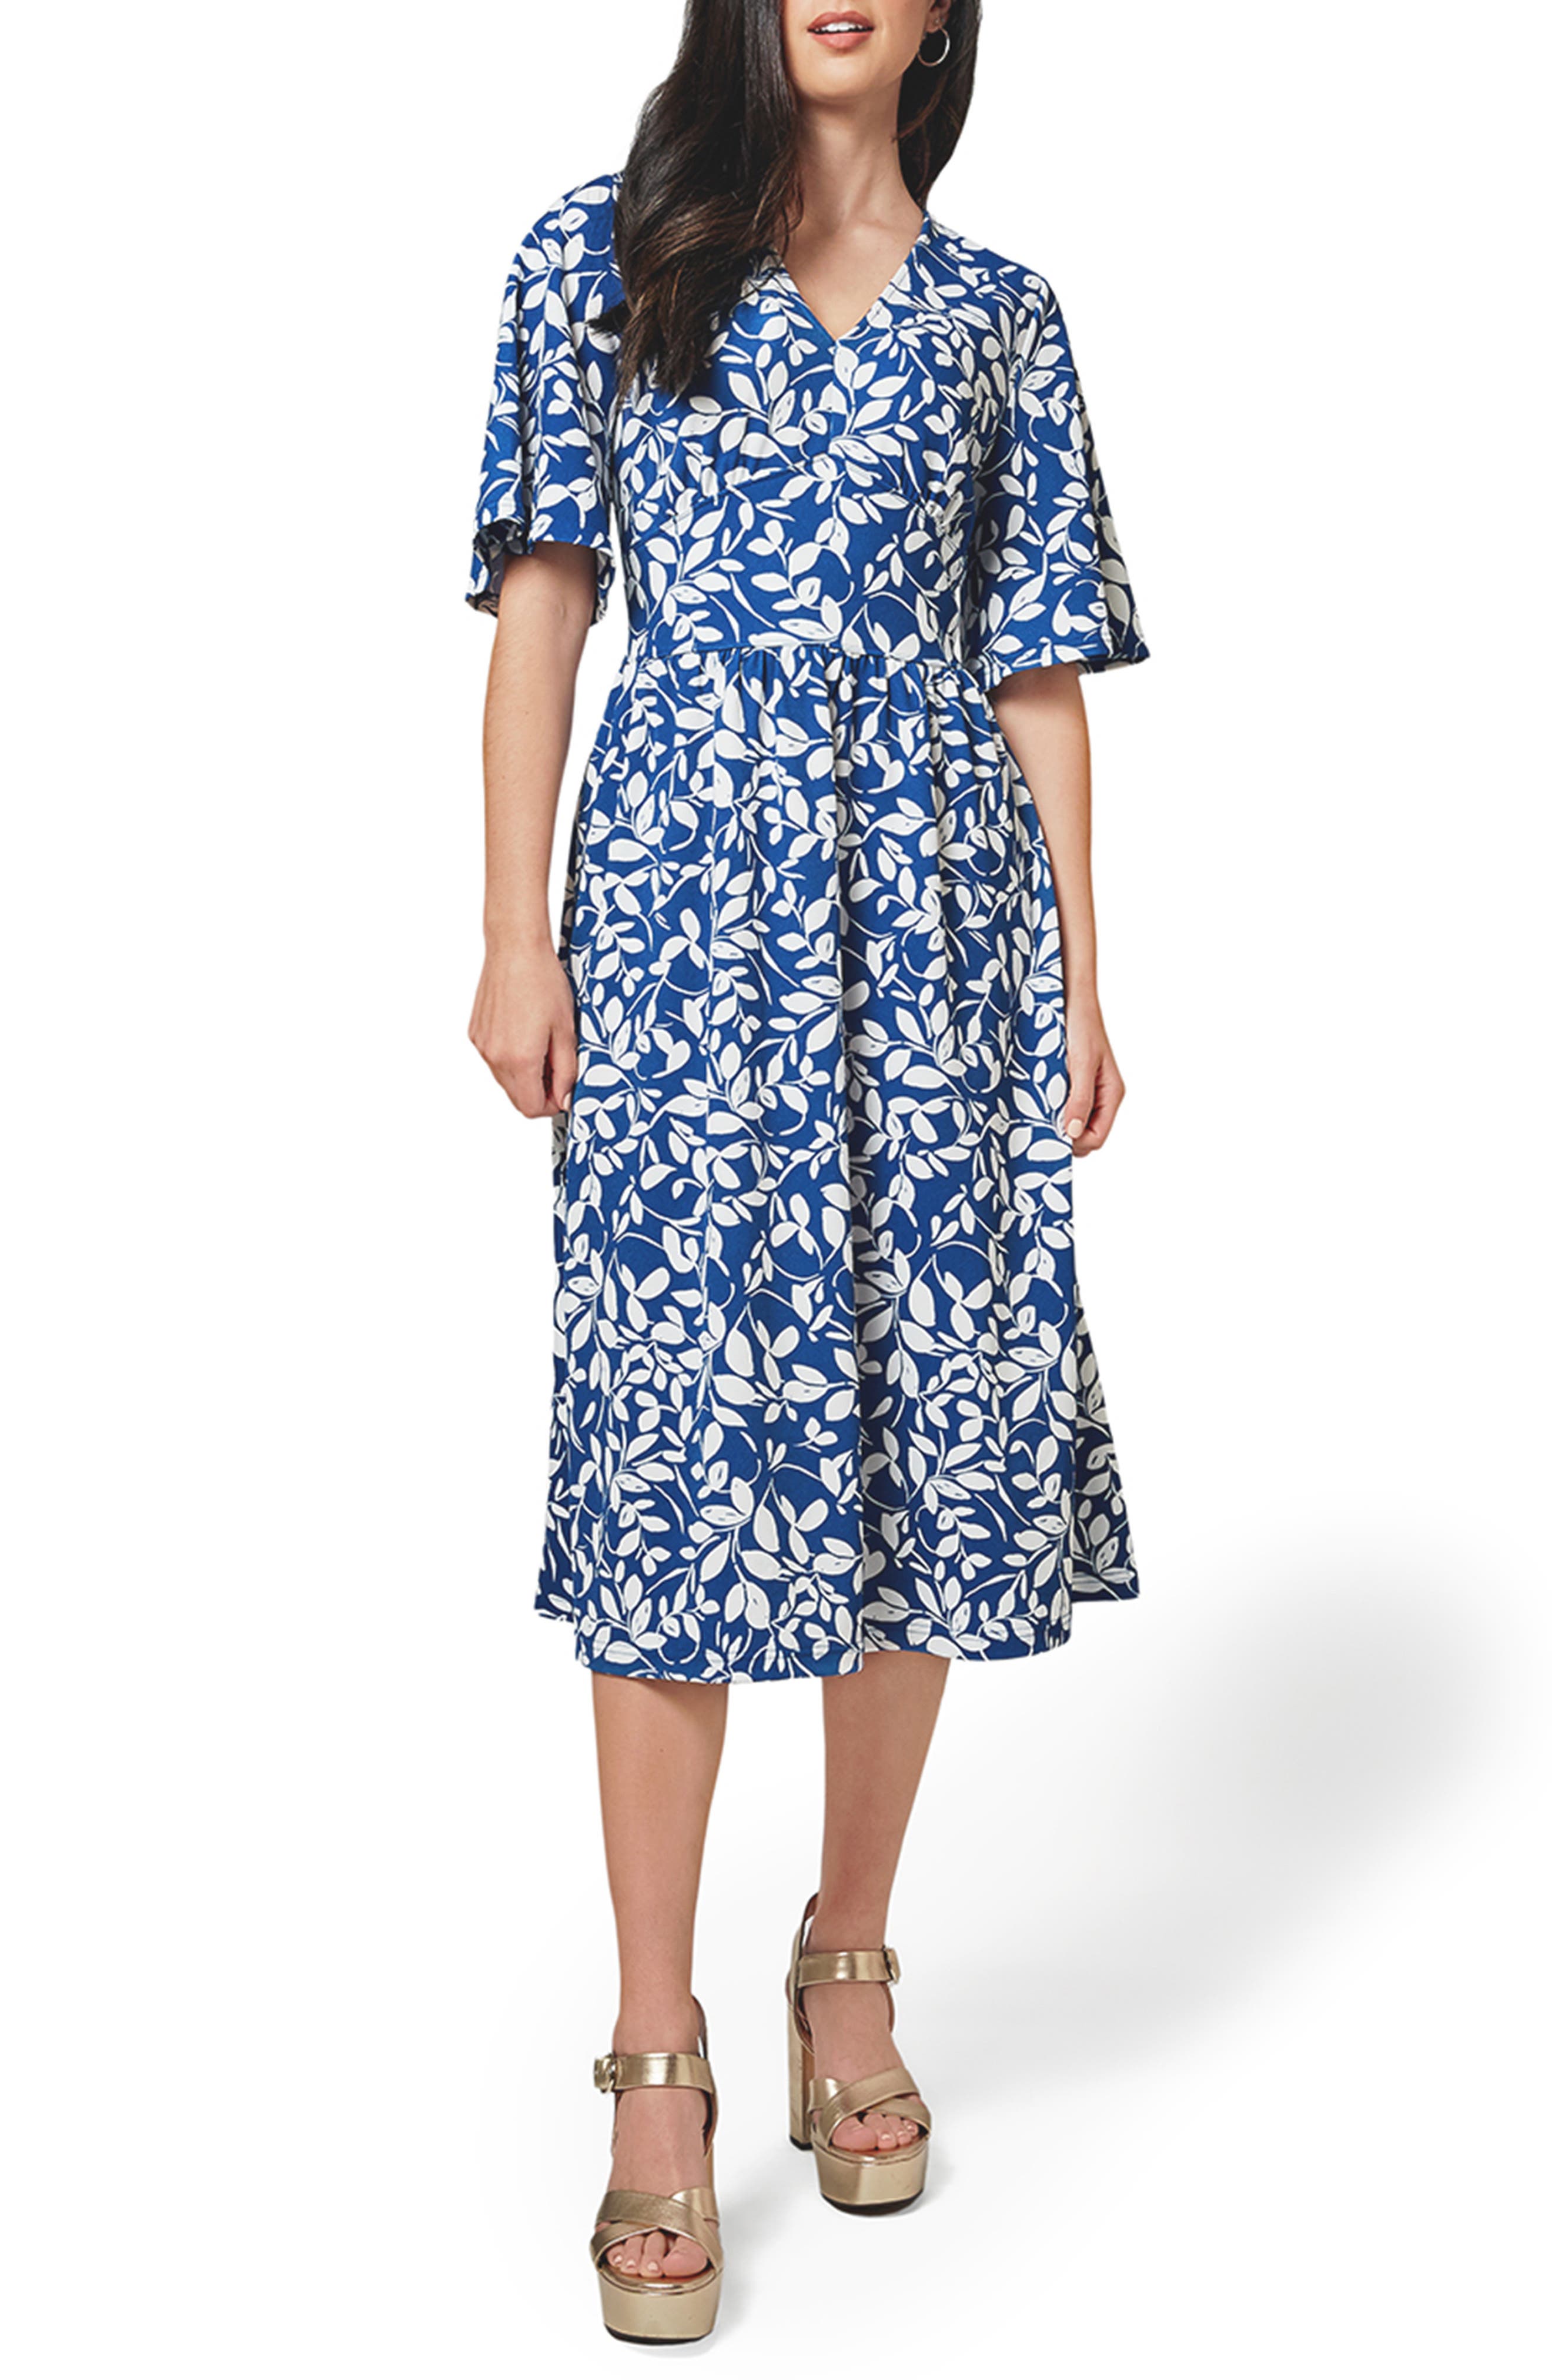 Leota Zoe Dress in Two Tone Floral Set Sail at Nordstrom